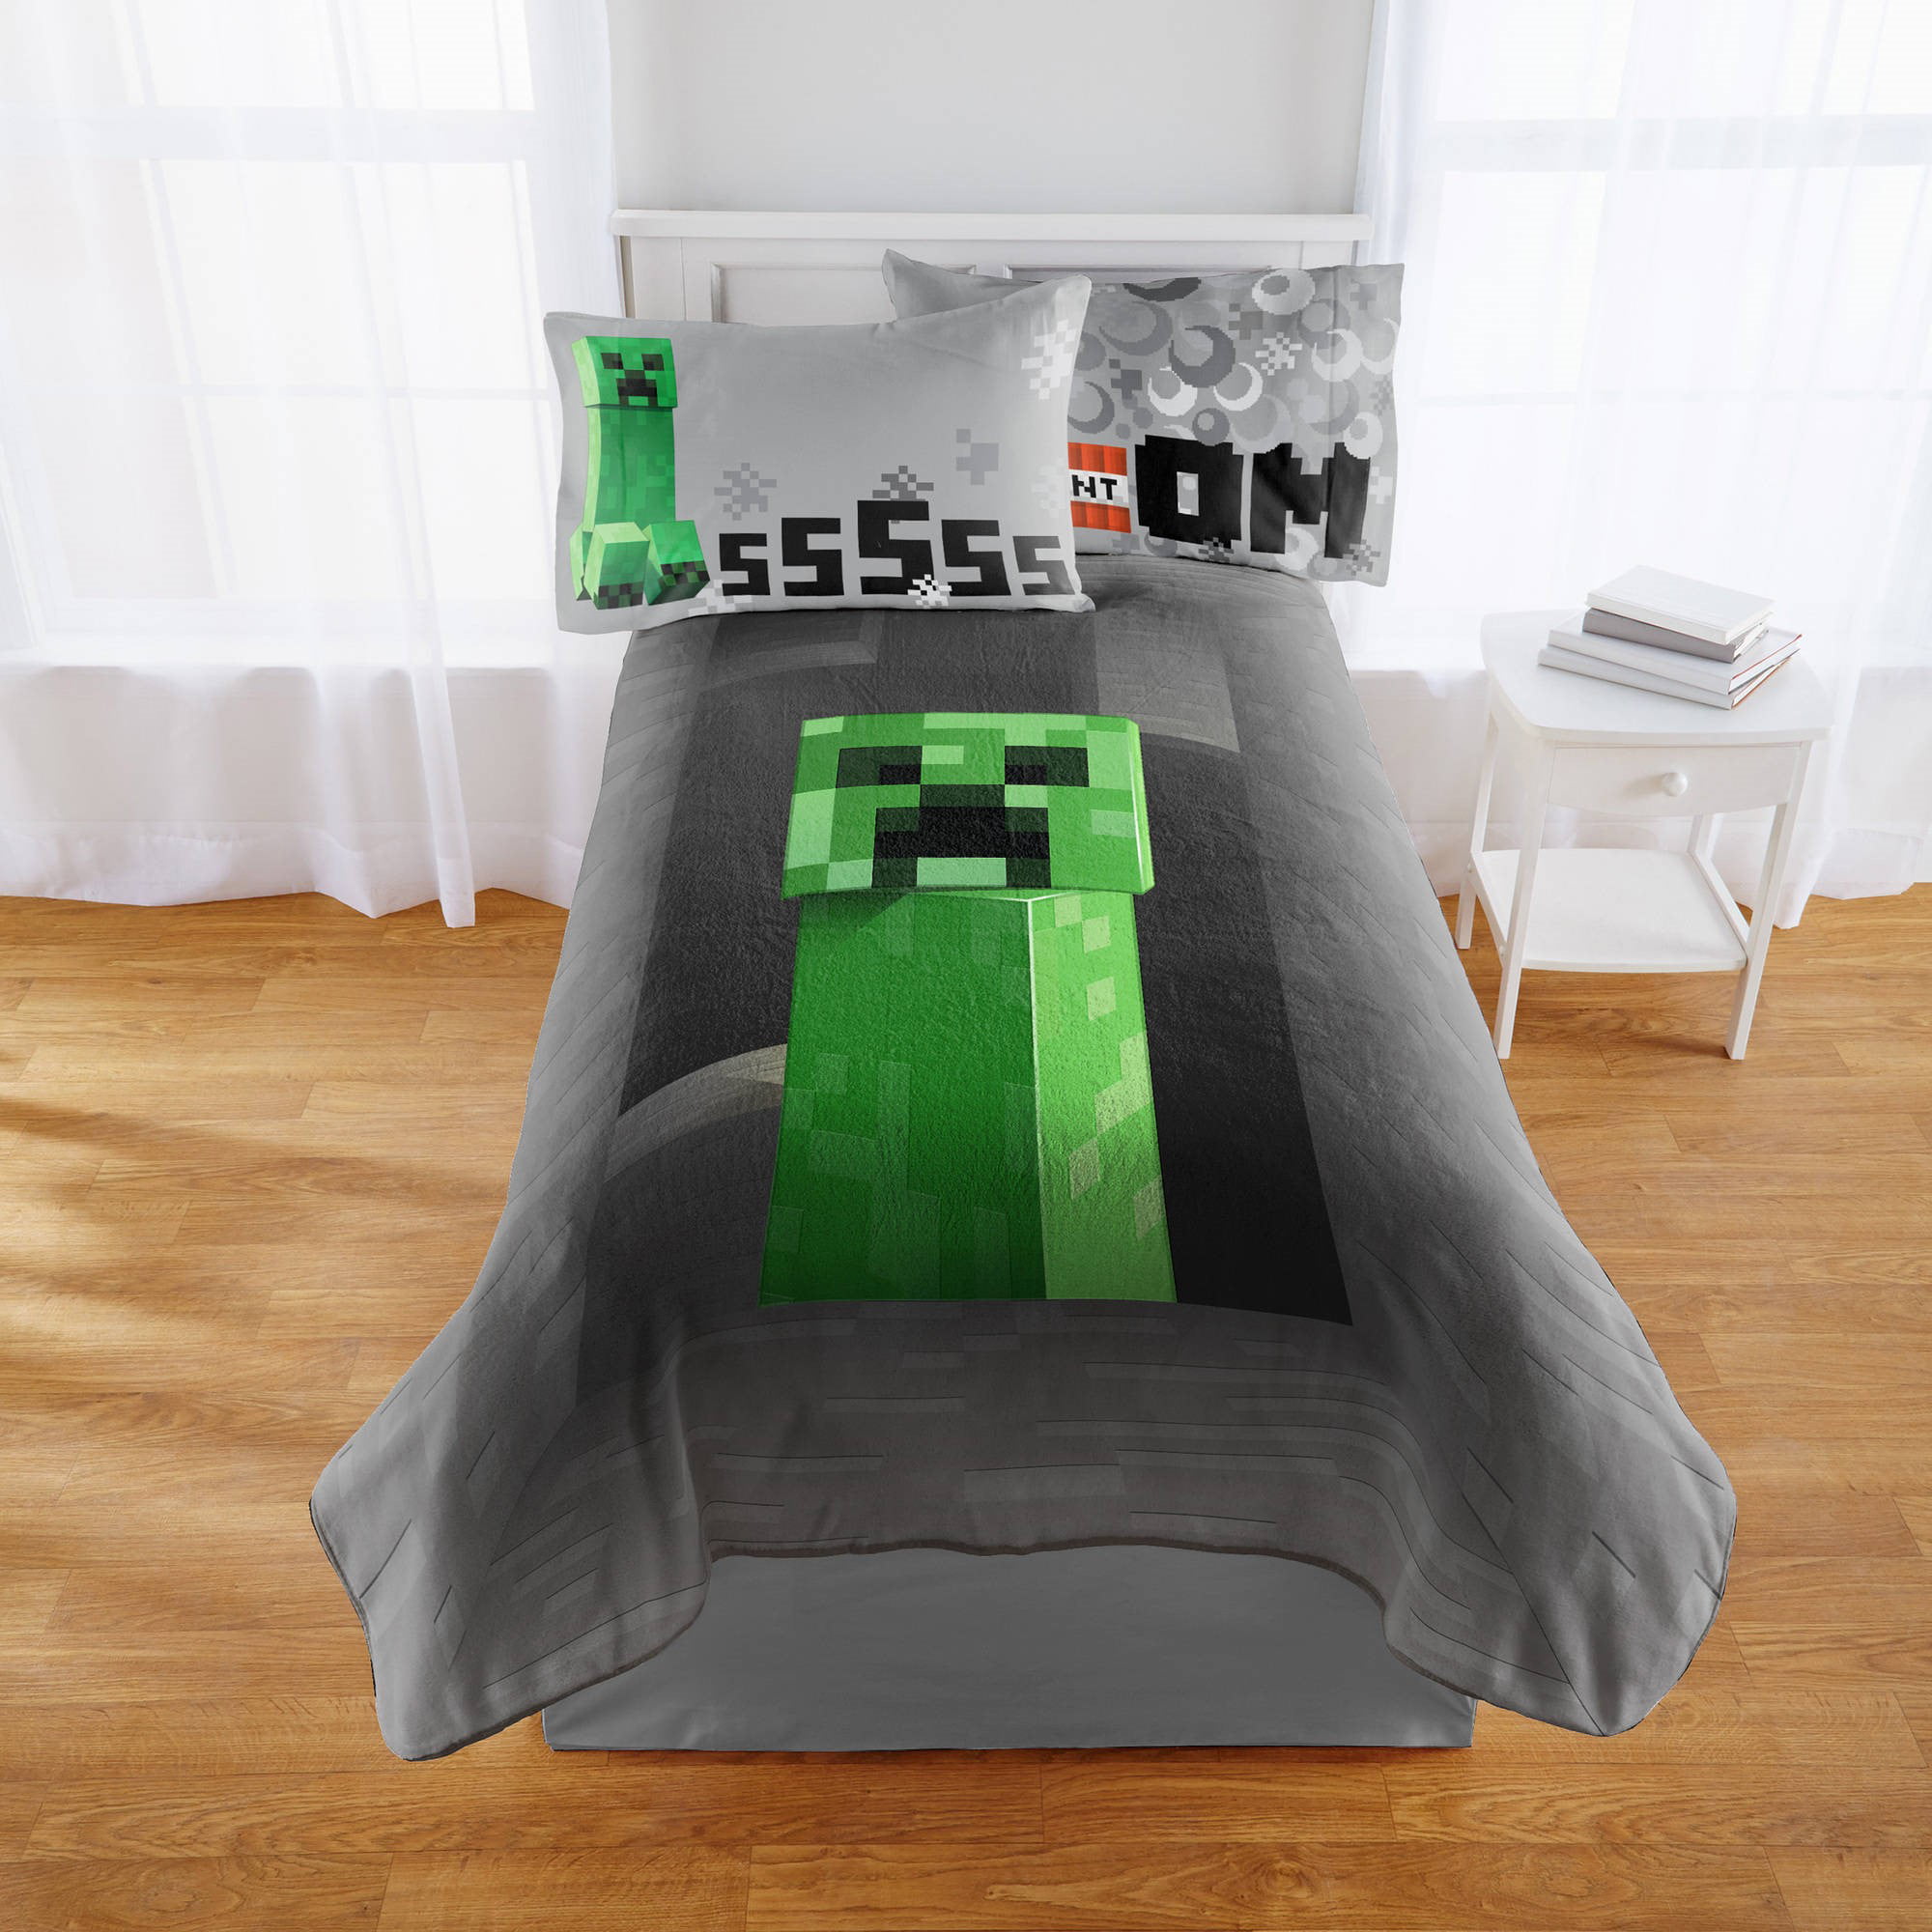 LARGE 62 x 90 Minecraft Plush Blanket iconic block building character Kids Bed 